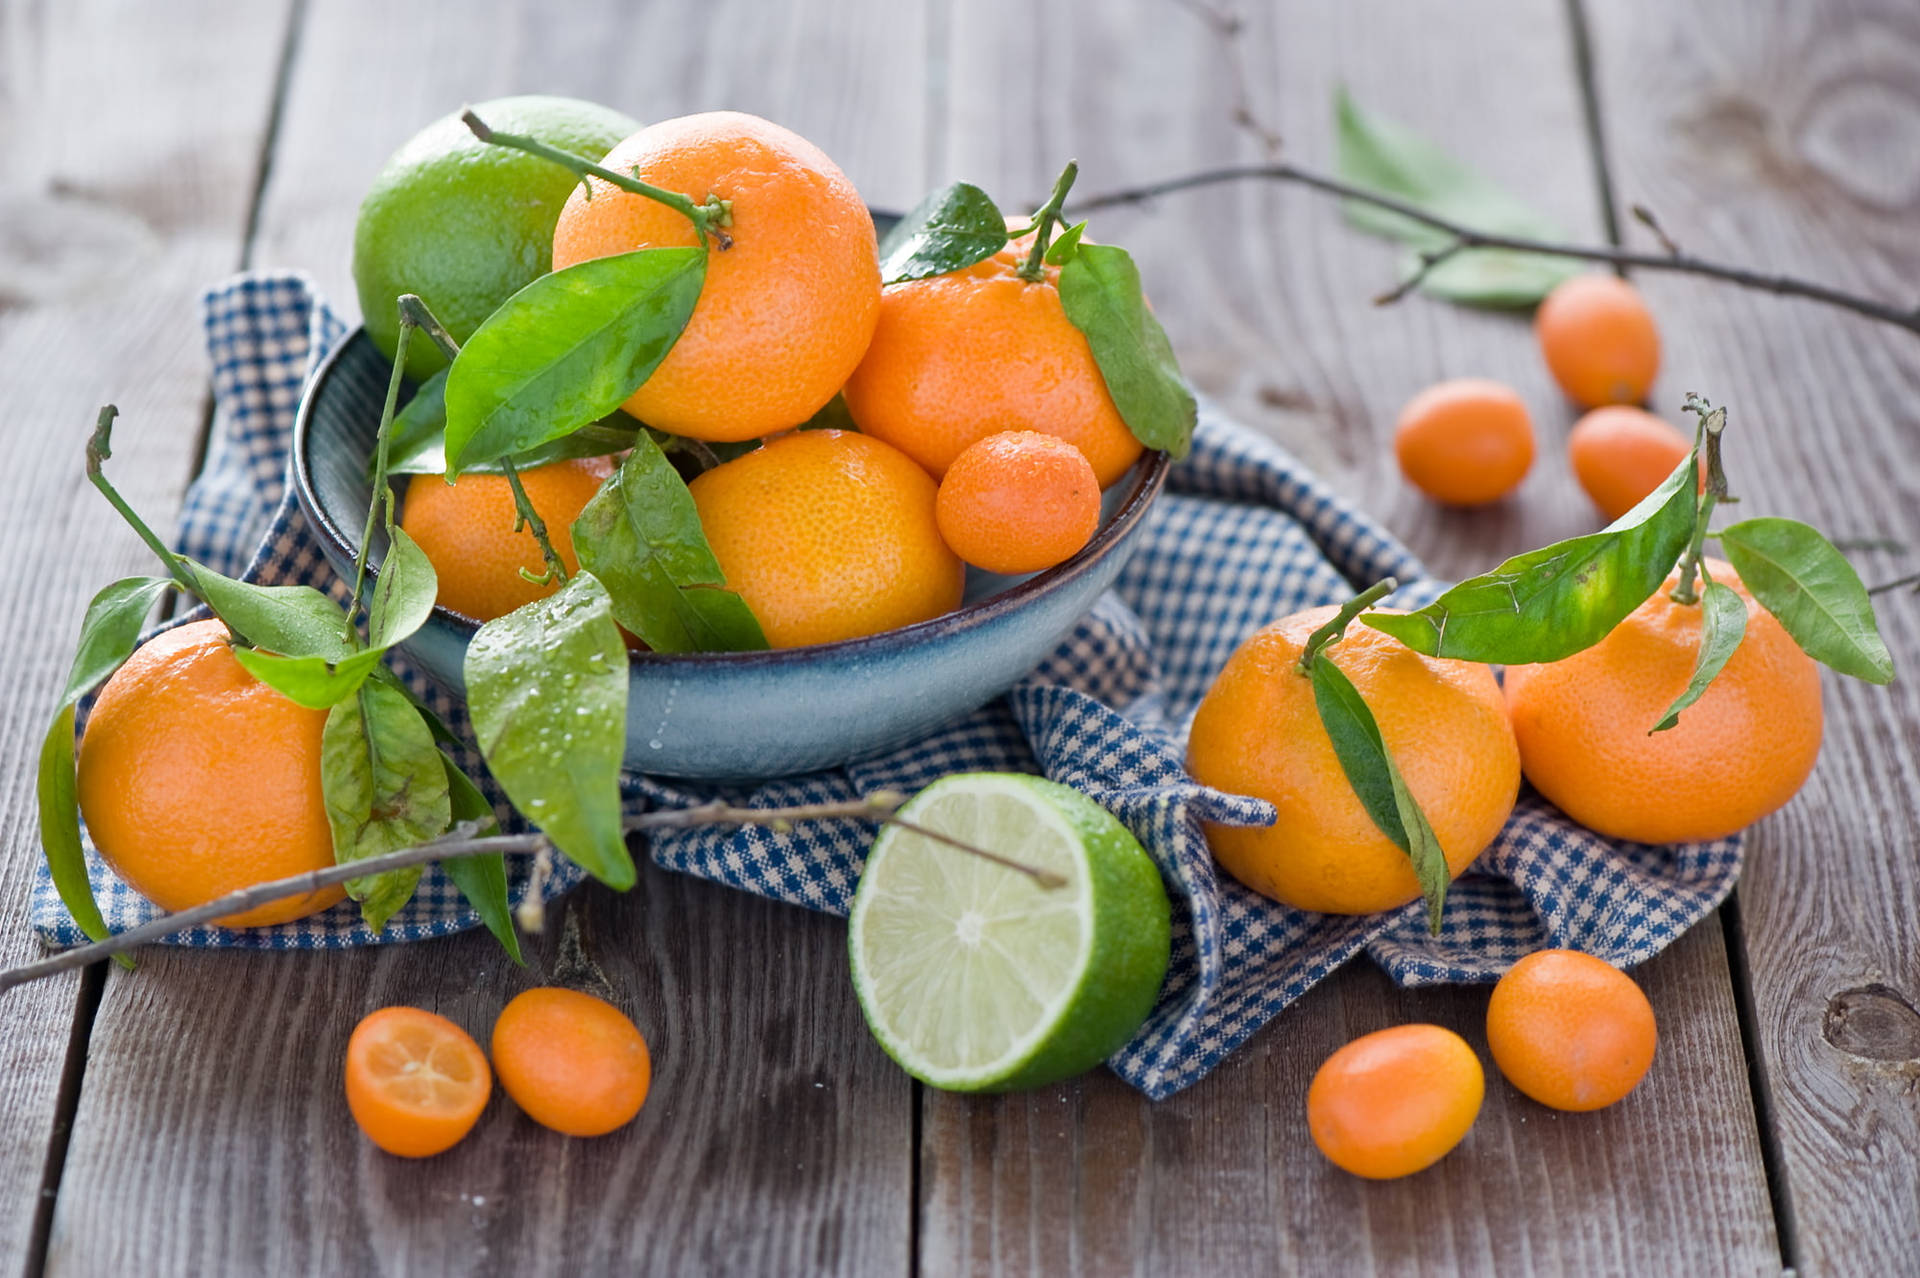 Kumquat Fruit With Limes And Oranges Wallpaper